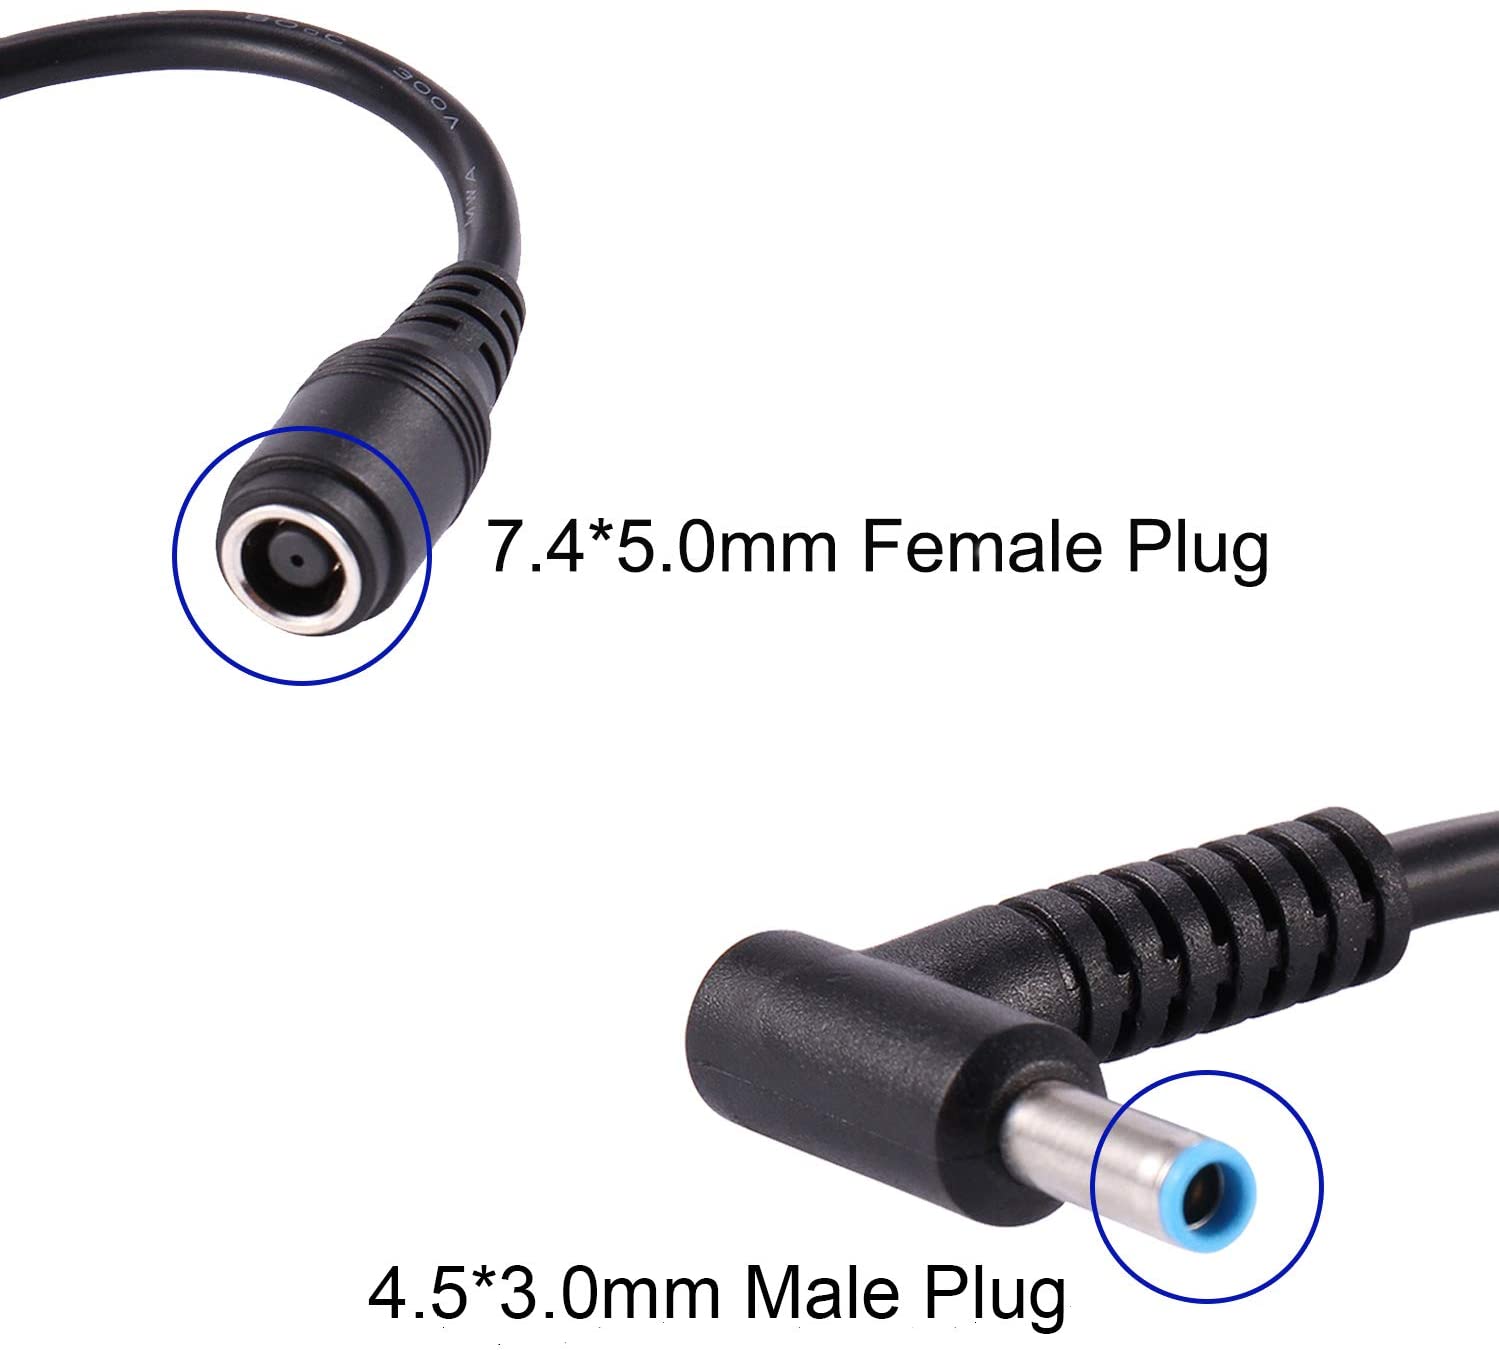 HF-DVAHP: DC Power Connector Cable 7.4mm x 5.0mm Female to 4.5mm x 3.0mm Male DC Power Adapter Cable Tip Connector Conventer Suitable for Hp Pavilion Laptop - Click Image to Close